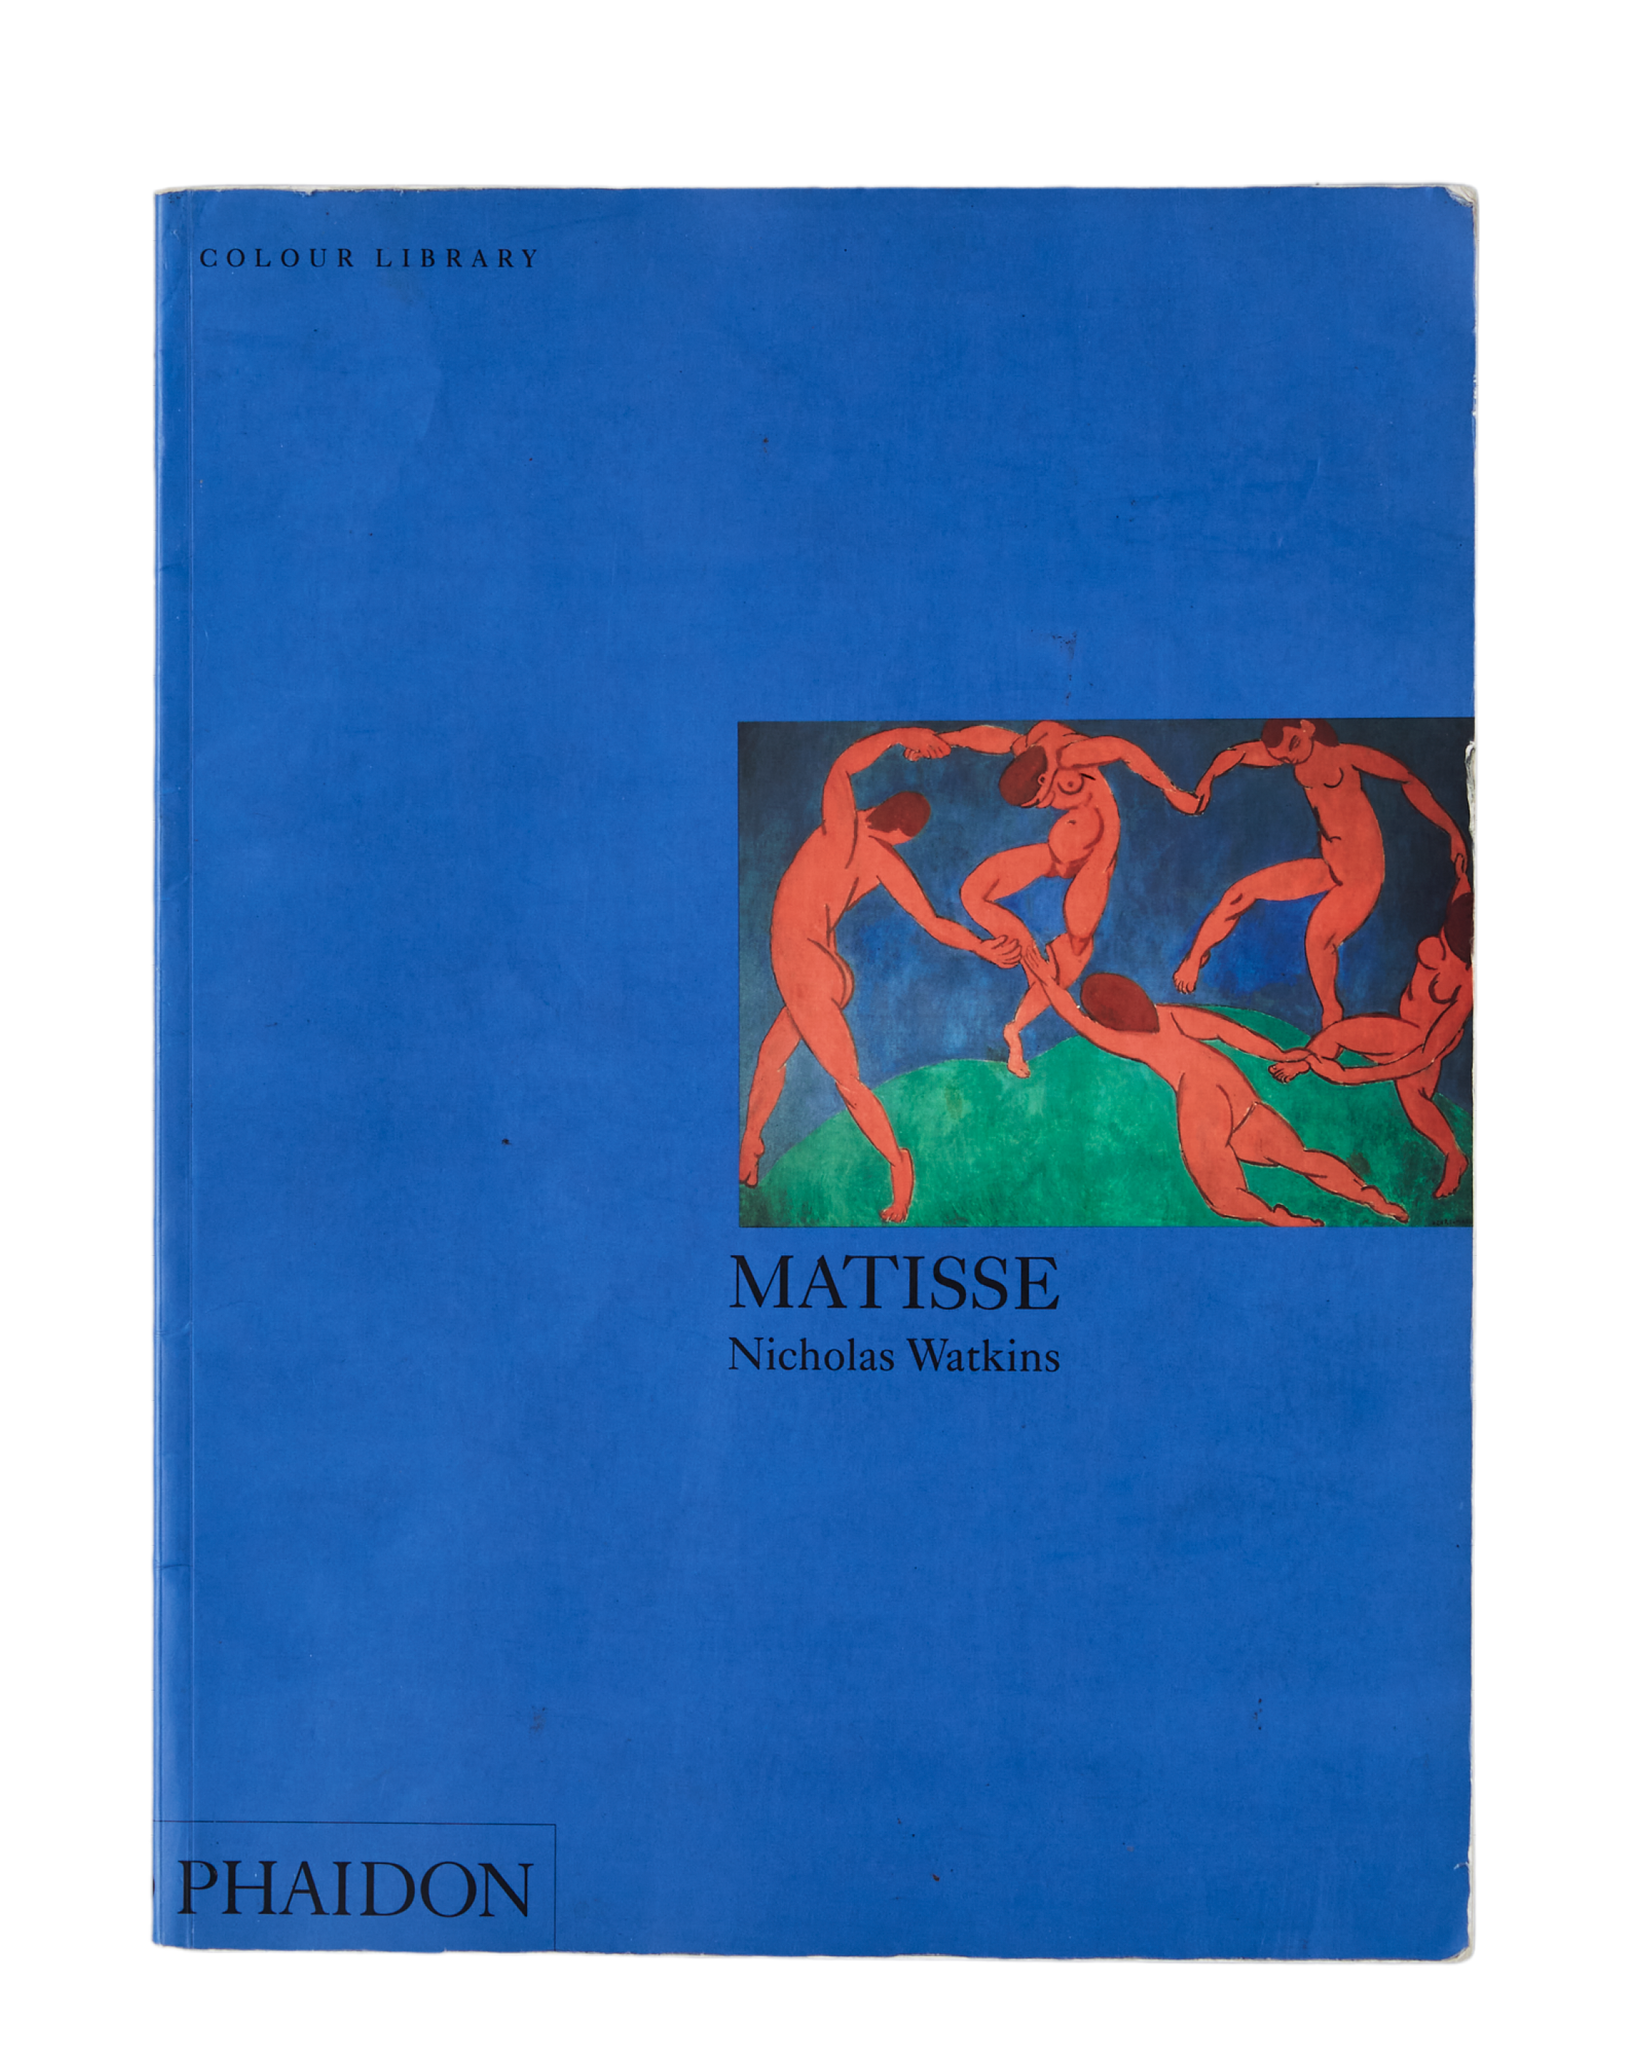 Matisse:Colour Library